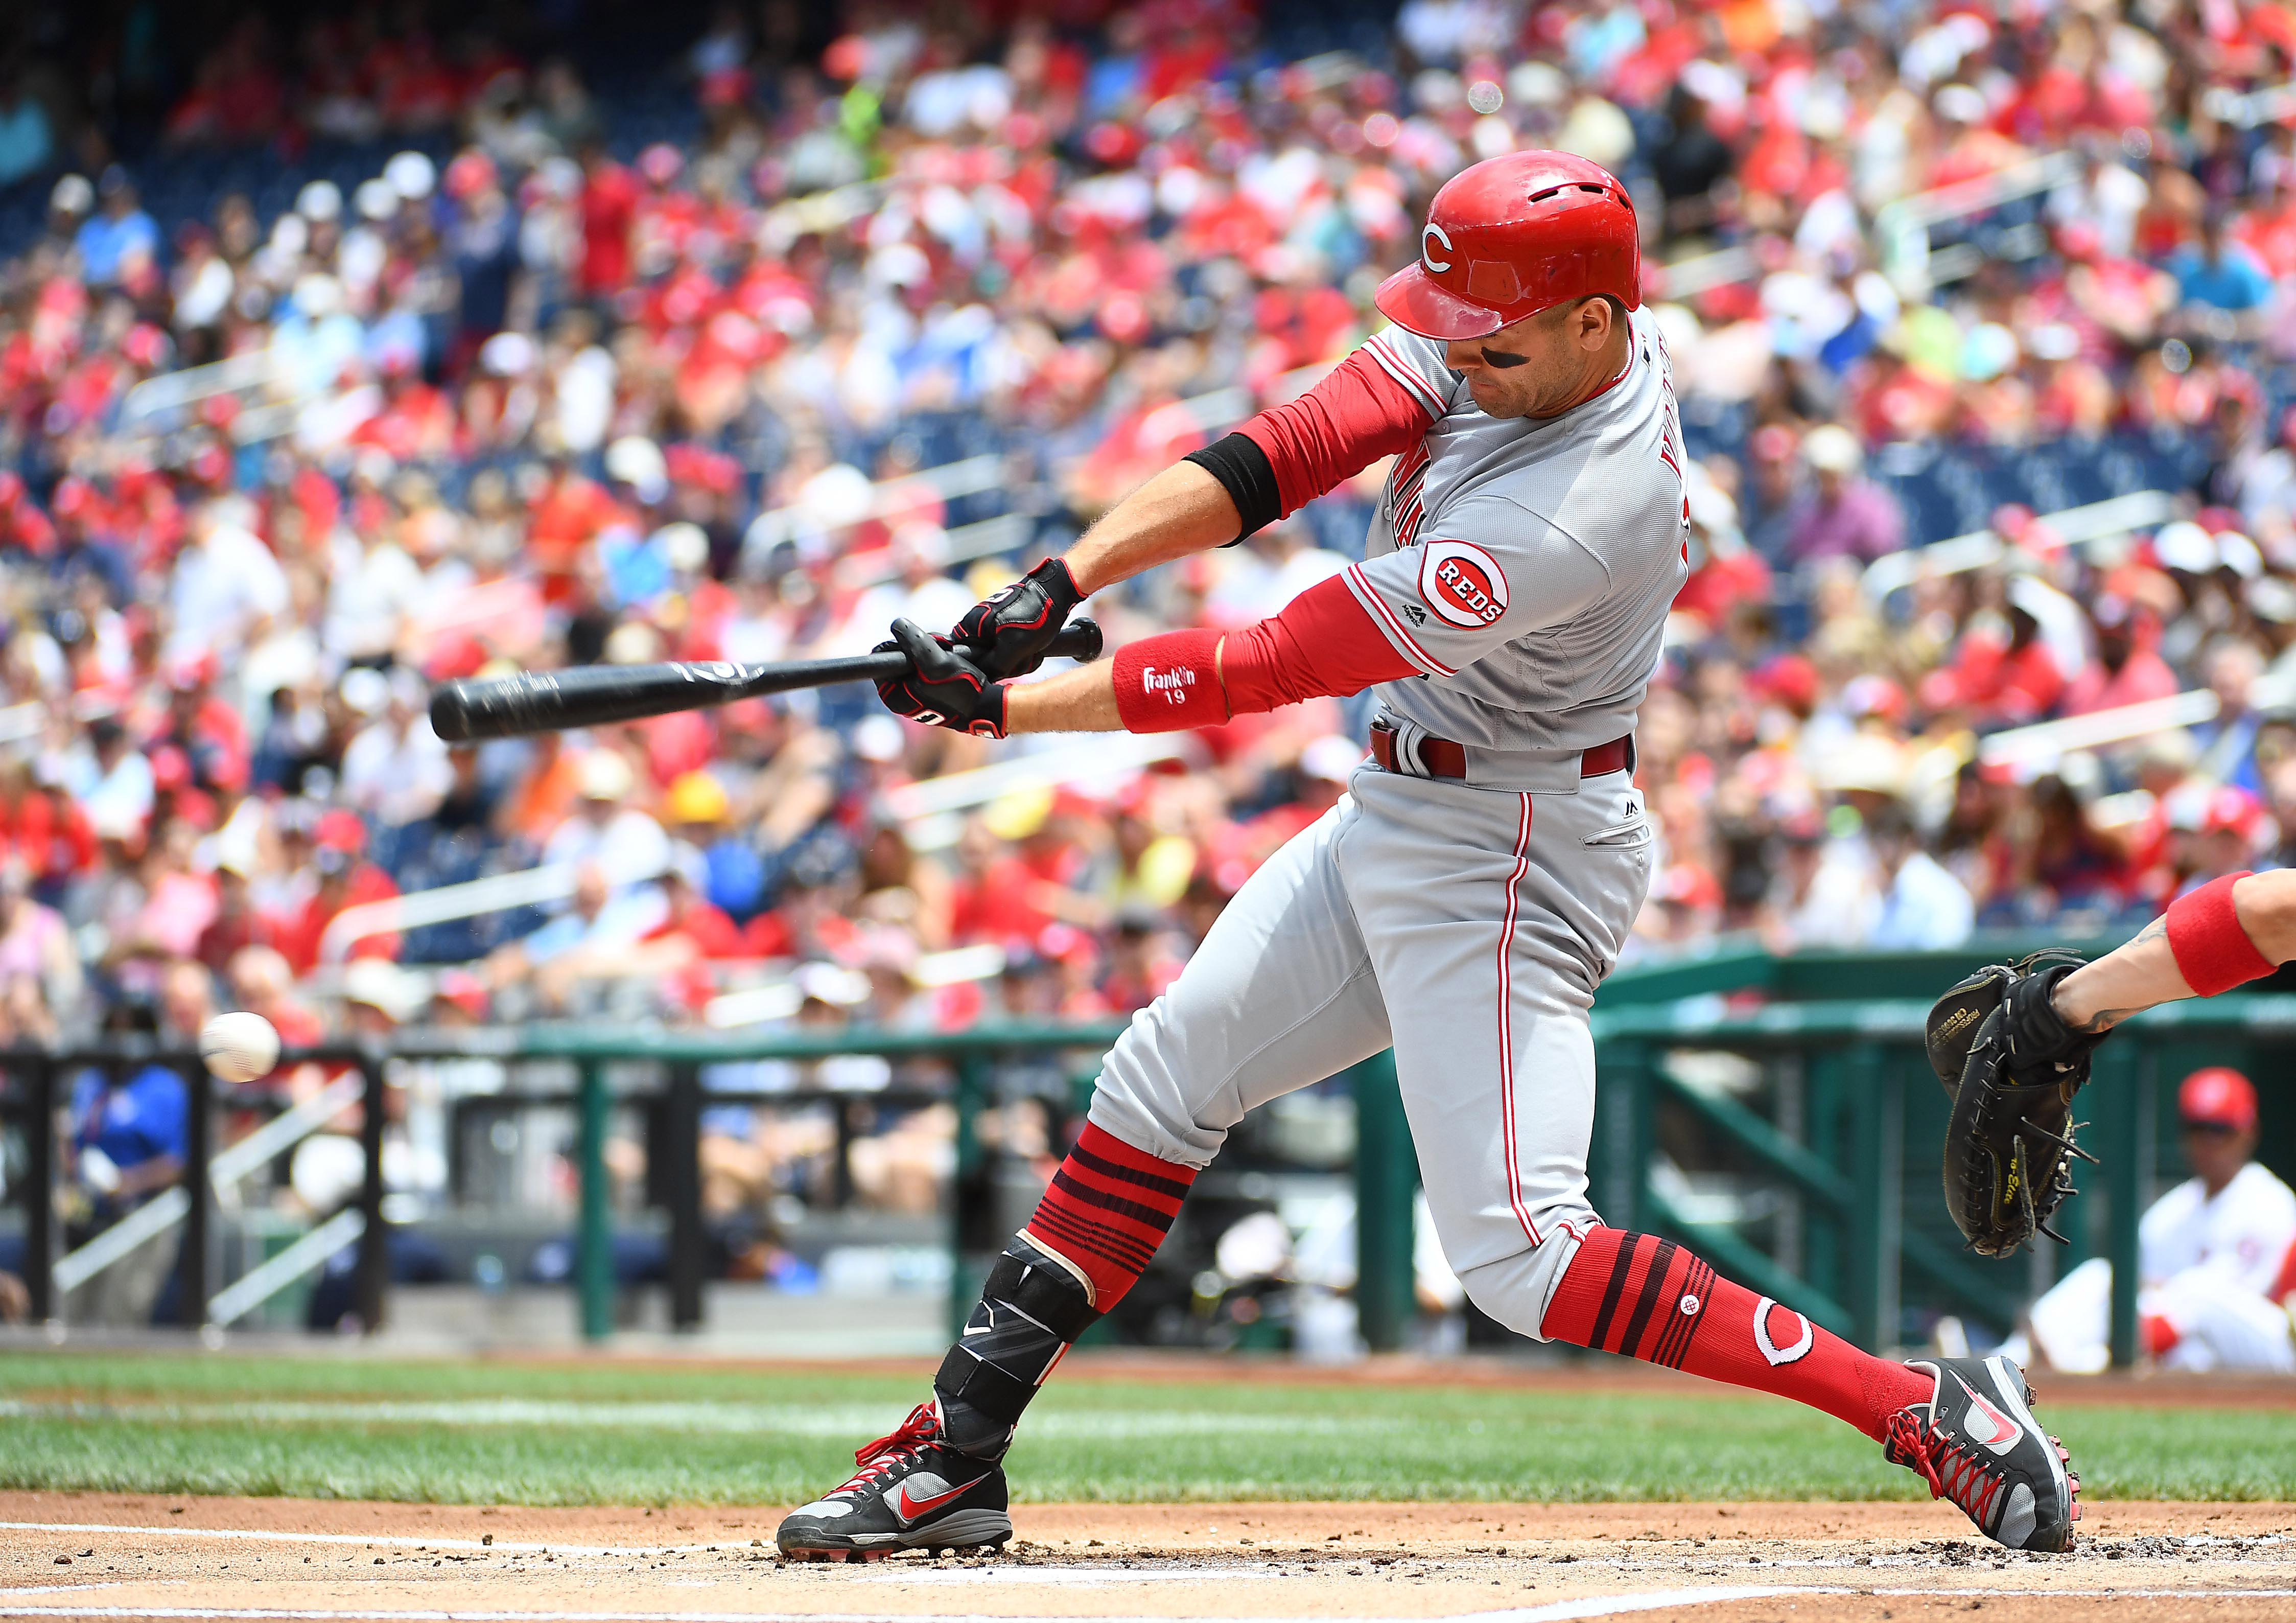 Cincinnati Reds rely too much on home runs to score and to win